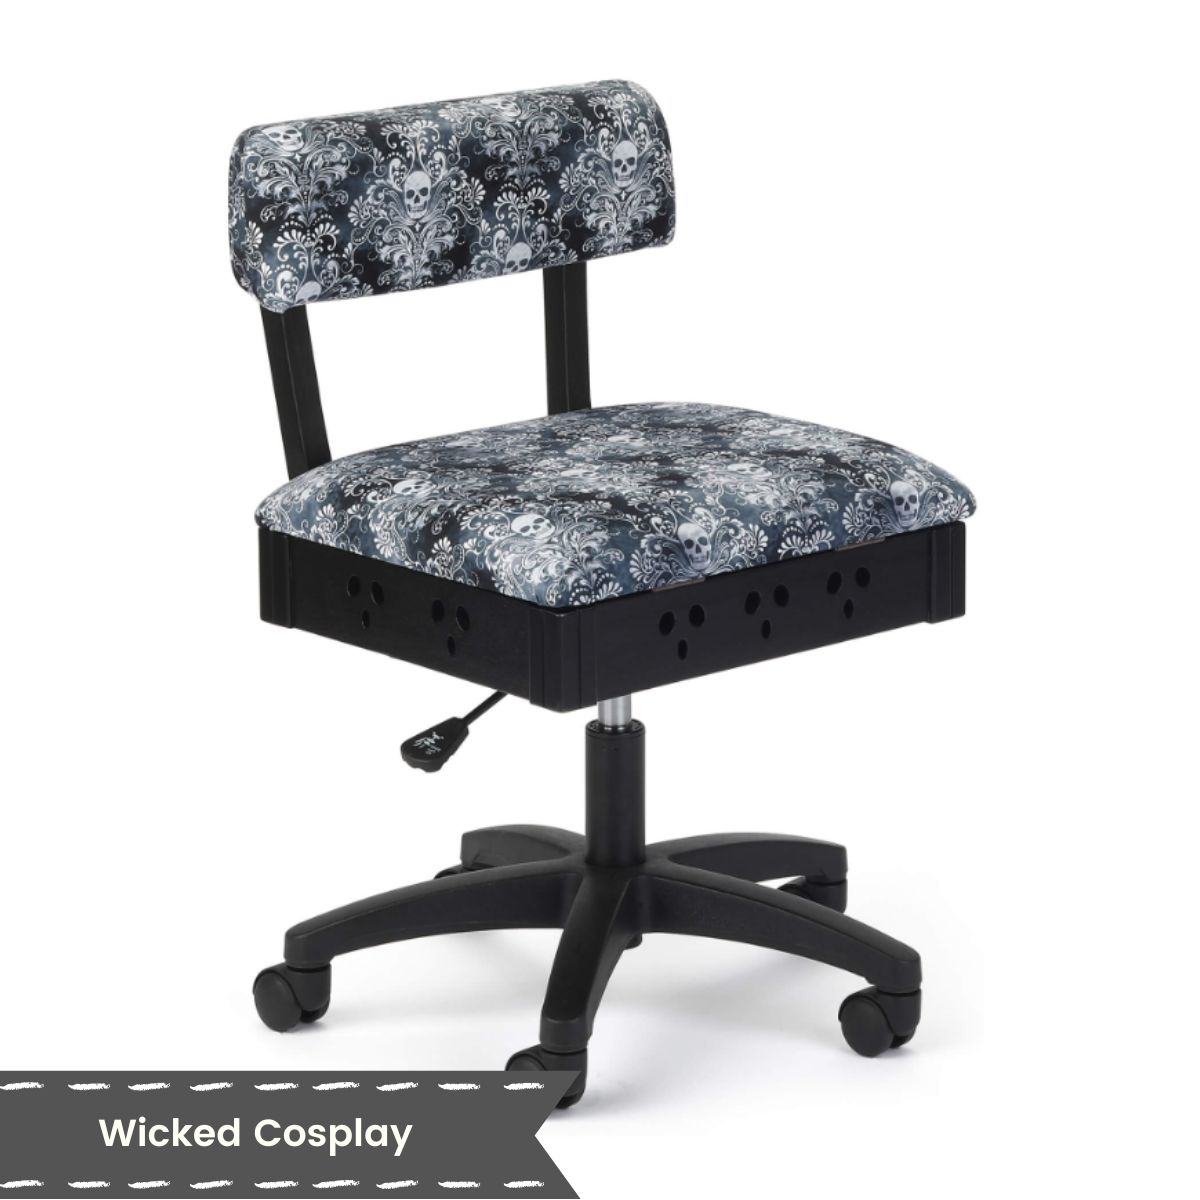 Arrow H7013B Adjustable Height Hydraulic Sewing and Craft Chair with Under  Seat Storage and Printed Fabric by Riley Blake, Black Notions Upholstery